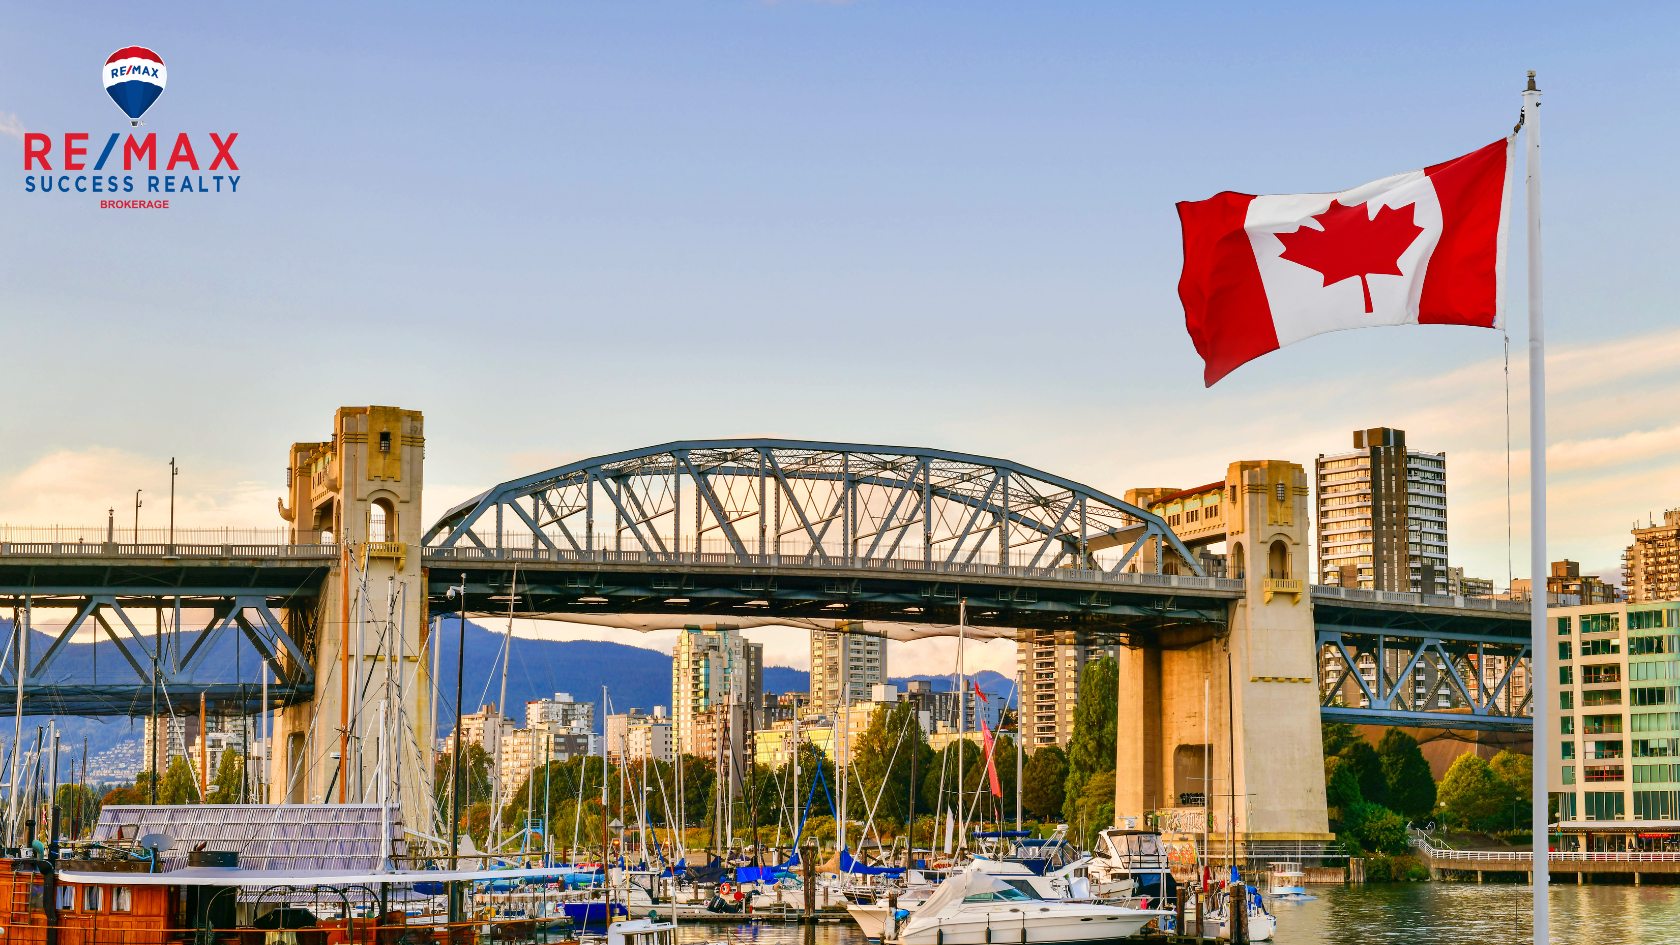 canada flag in front of a bridge with boats on the river